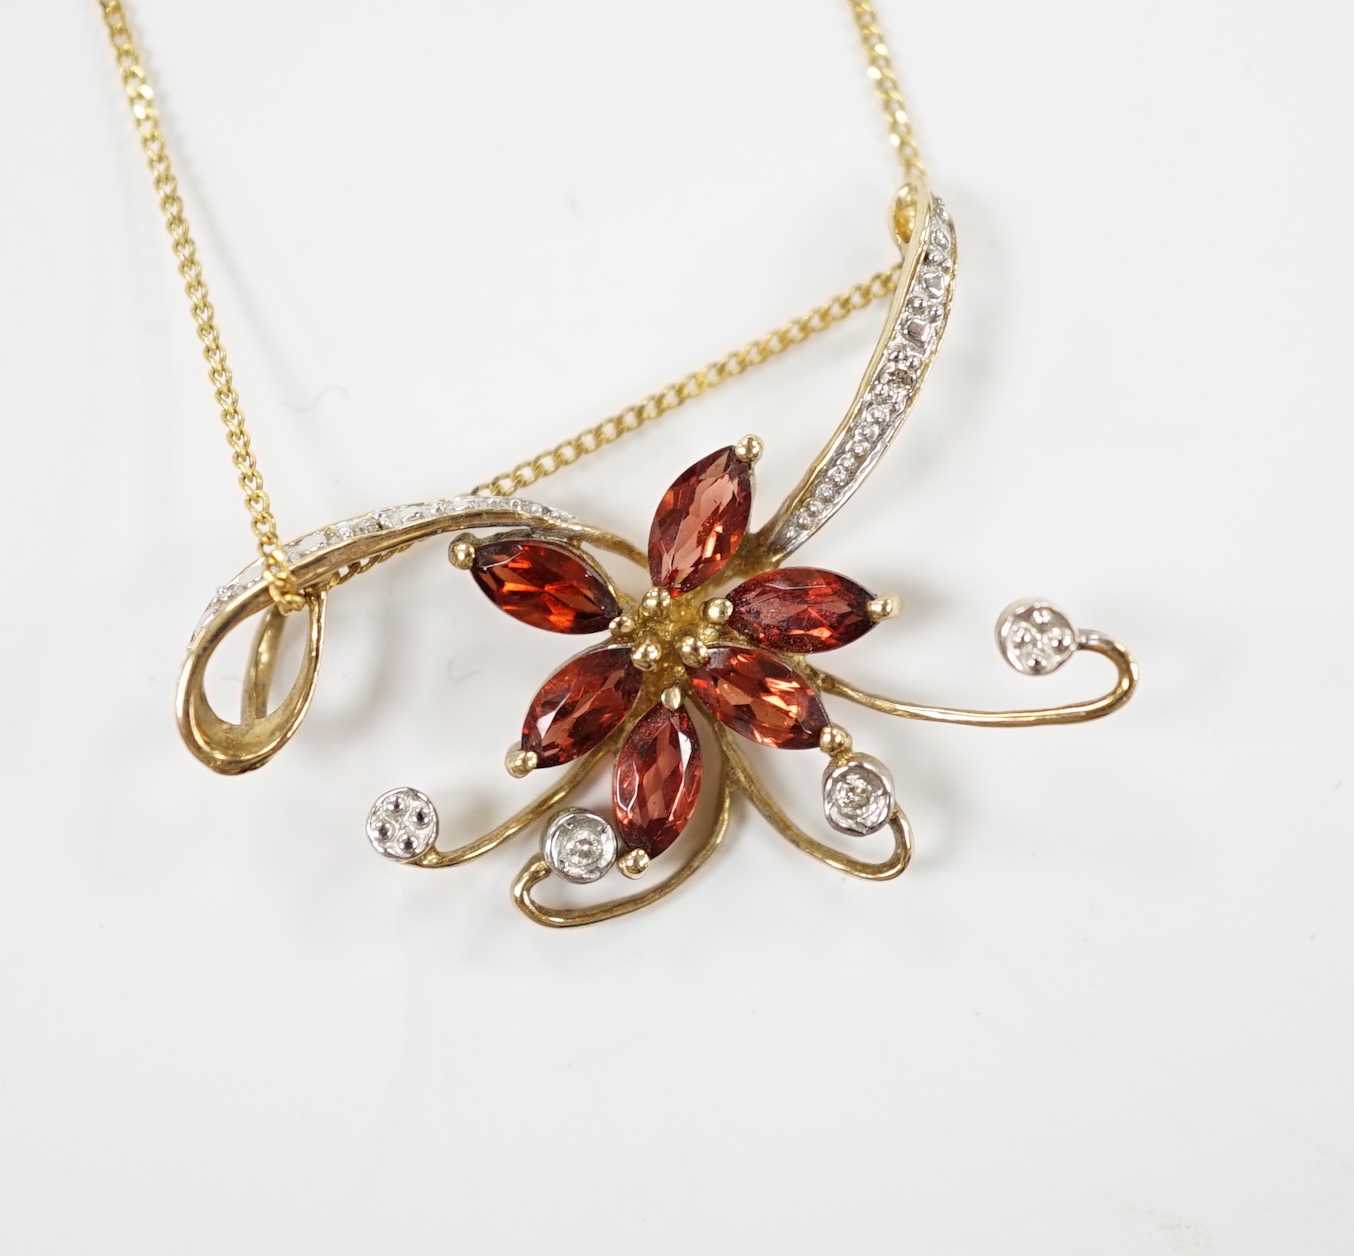 A modern 9ct gold and gem set foliate pendant on chain, pendant 30mm, gross weight 2.6 grams.